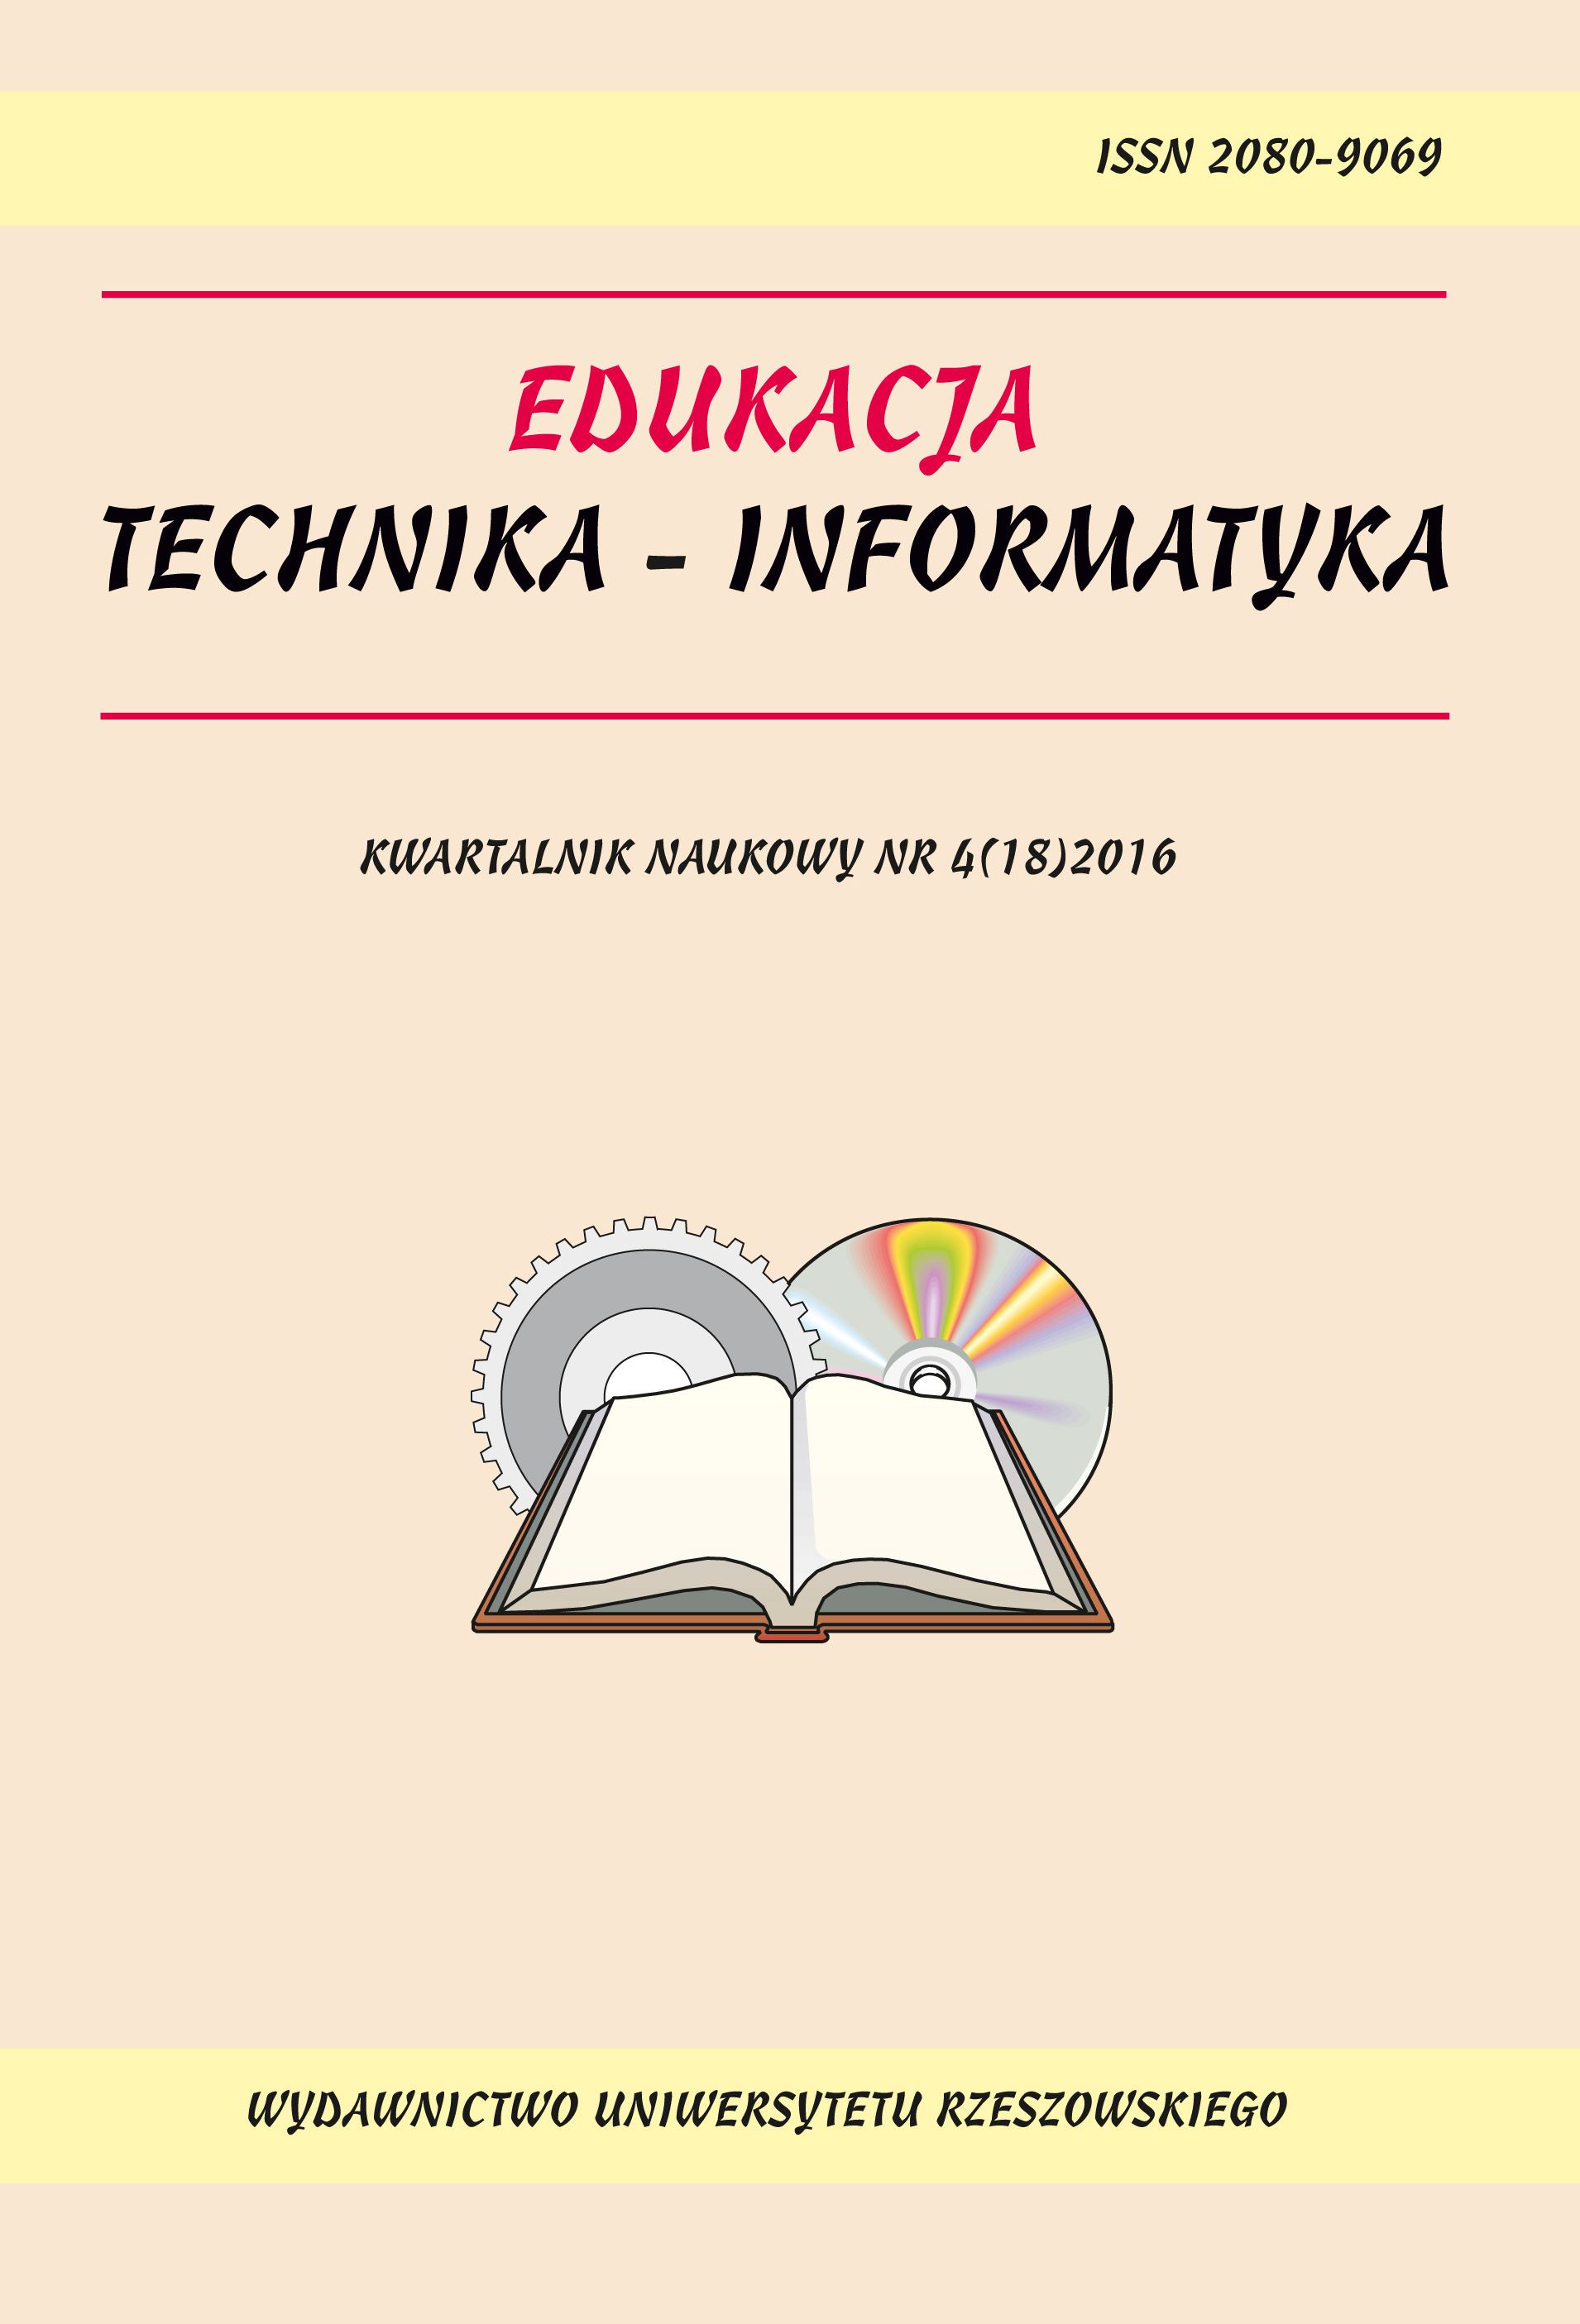 Support for learning programming in early education using
EduMATRIX Cover Image